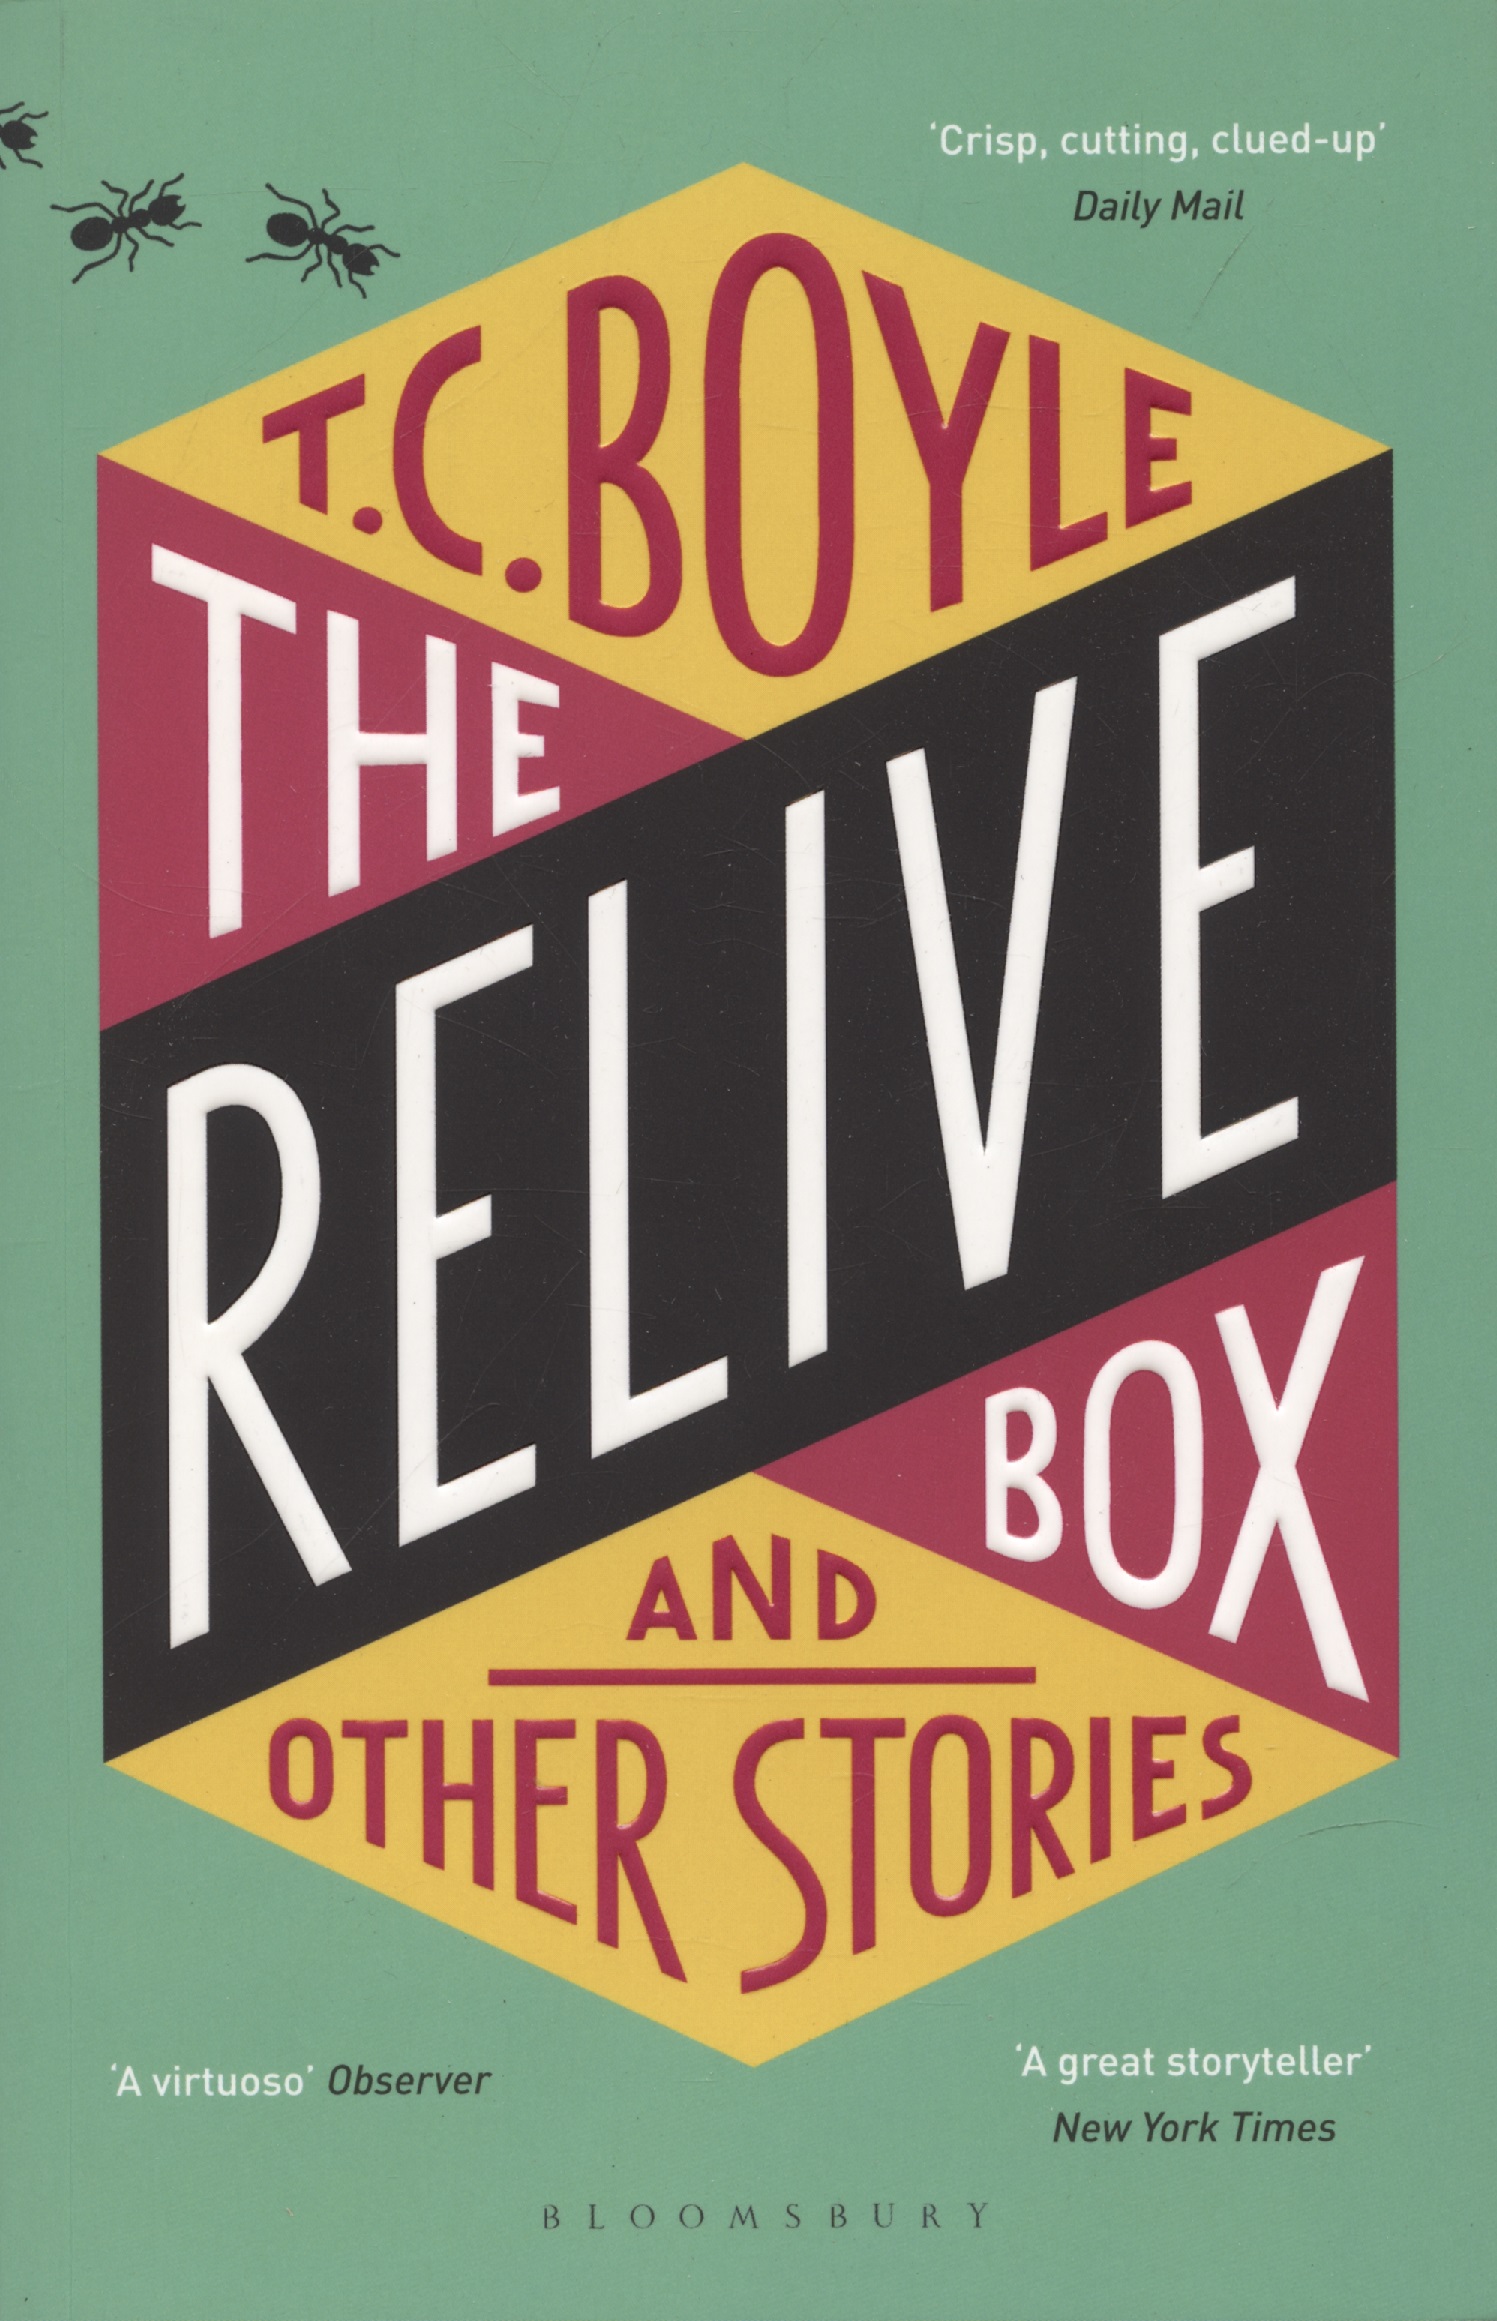 boyle t c water music Boyle T. Coraghessan The Relive Box and Other Stories